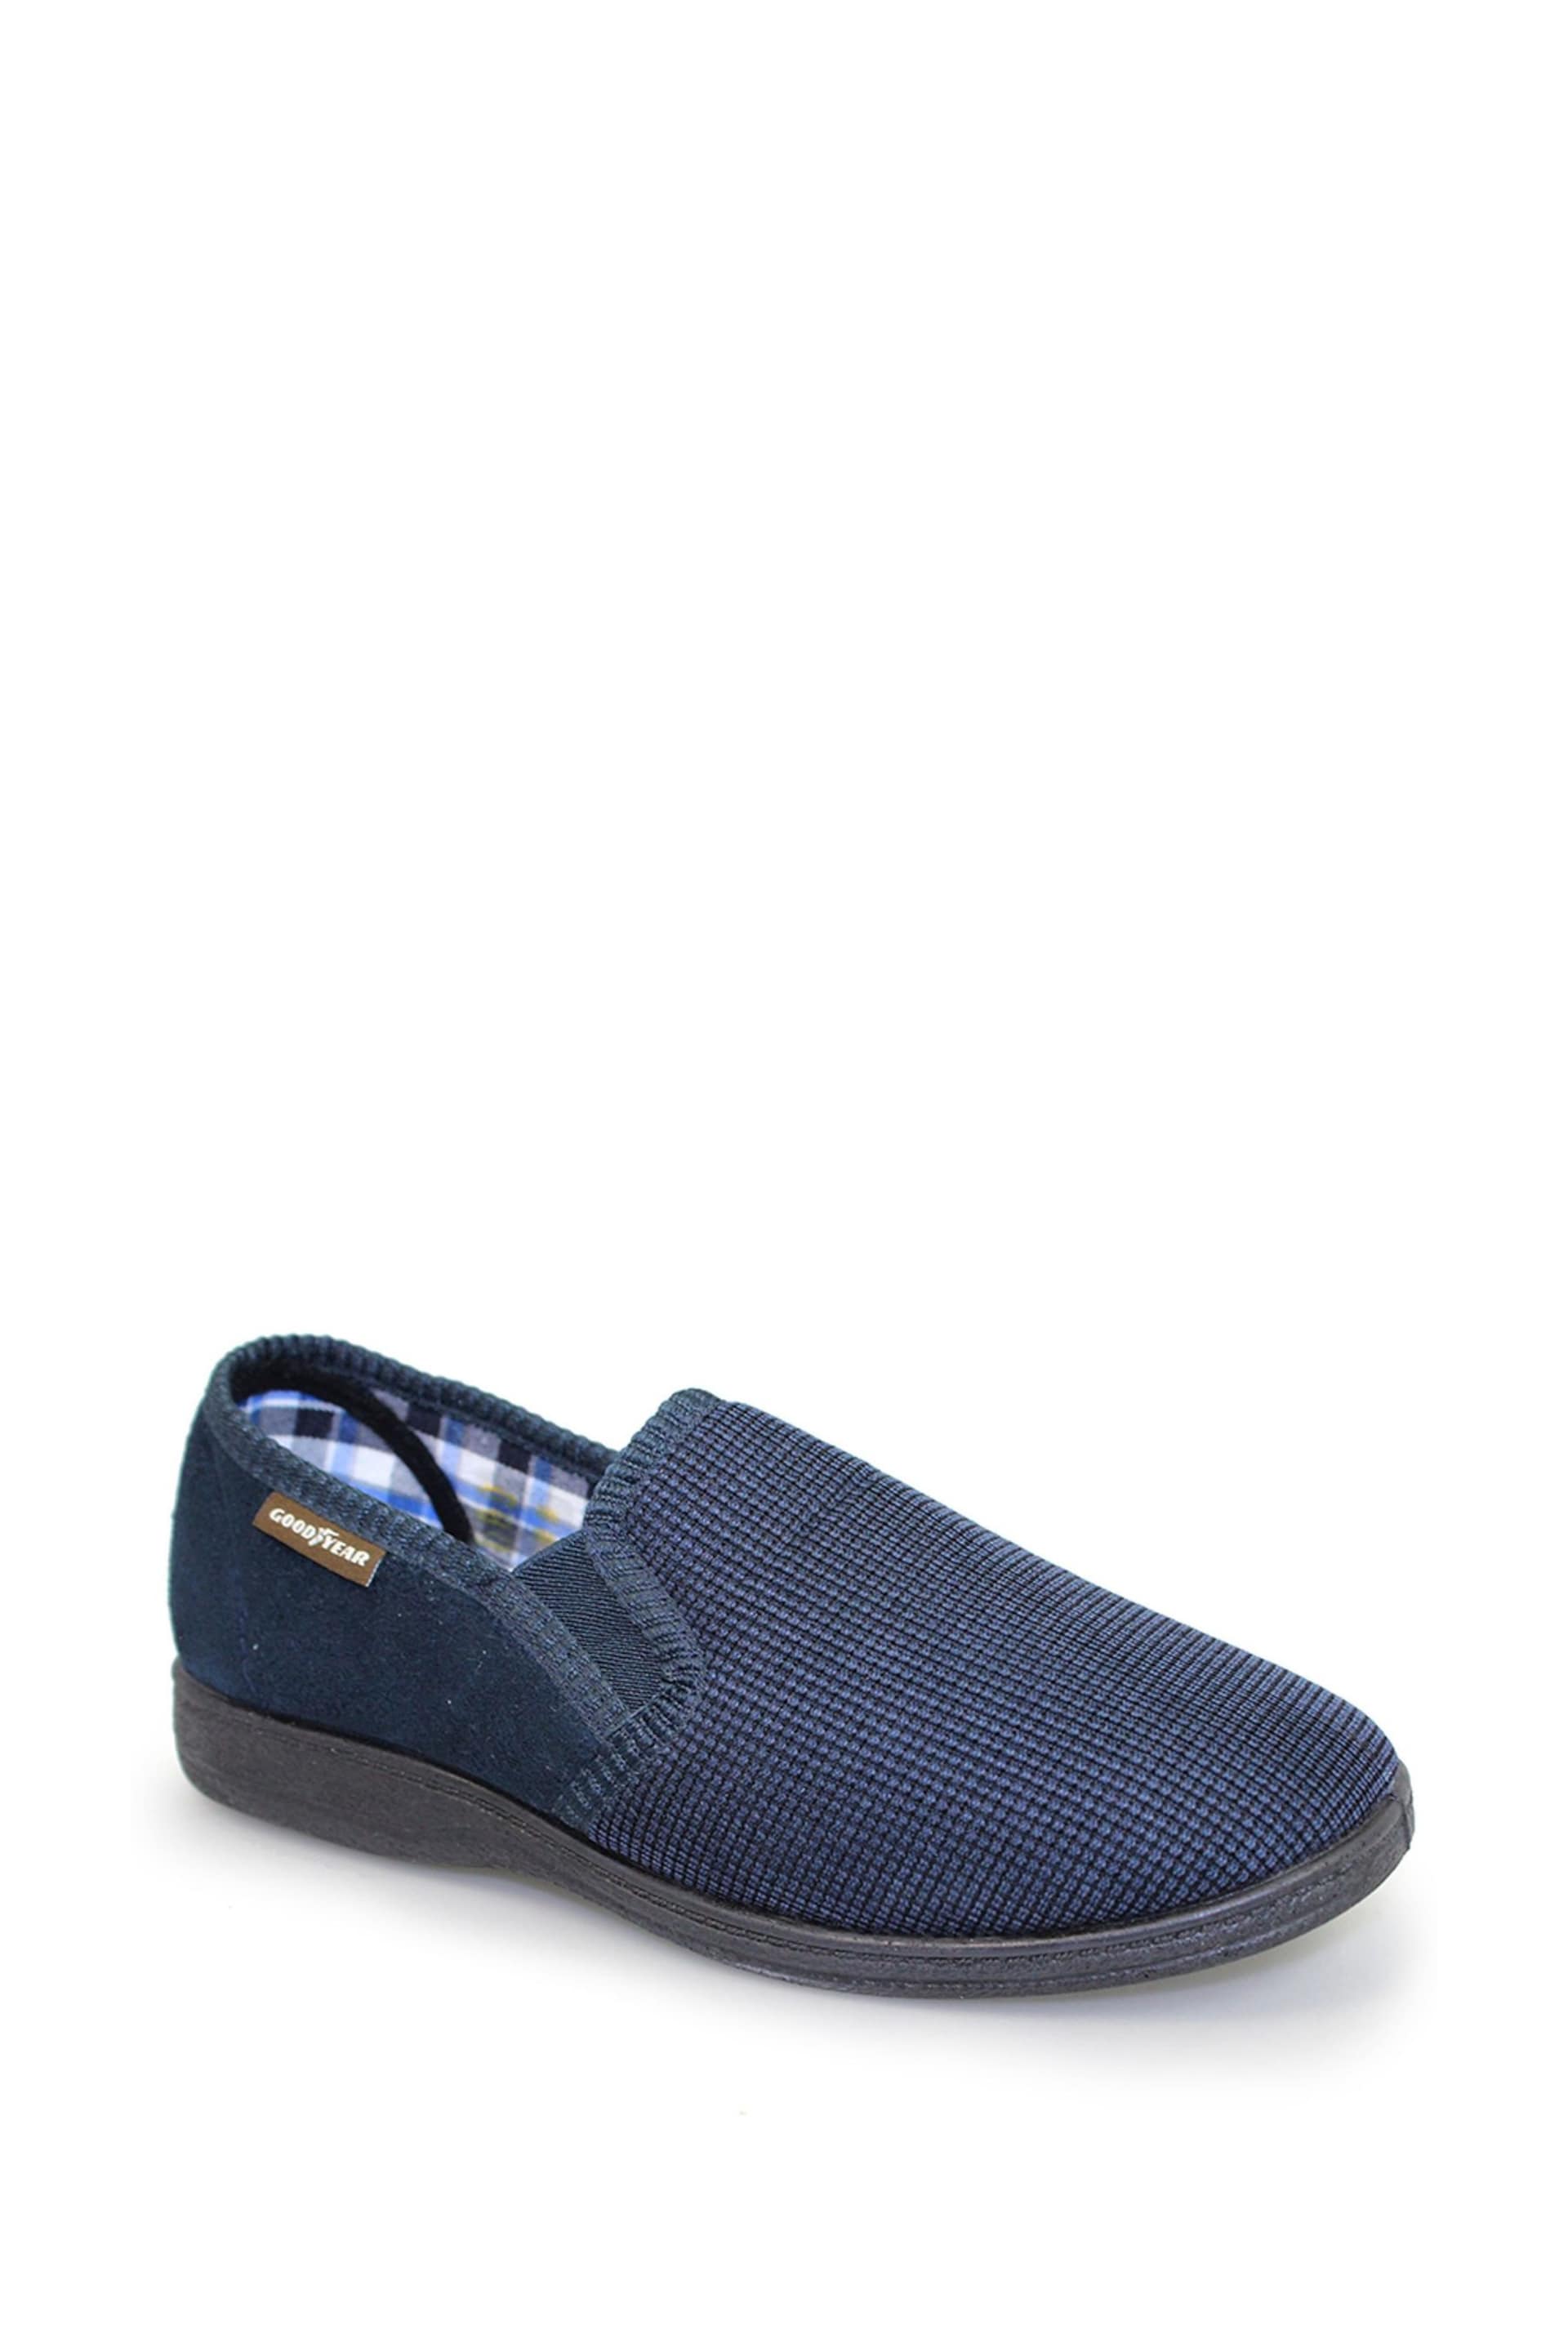 Goodyear Blue Mallory Blue Full Slippers - Image 2 of 4